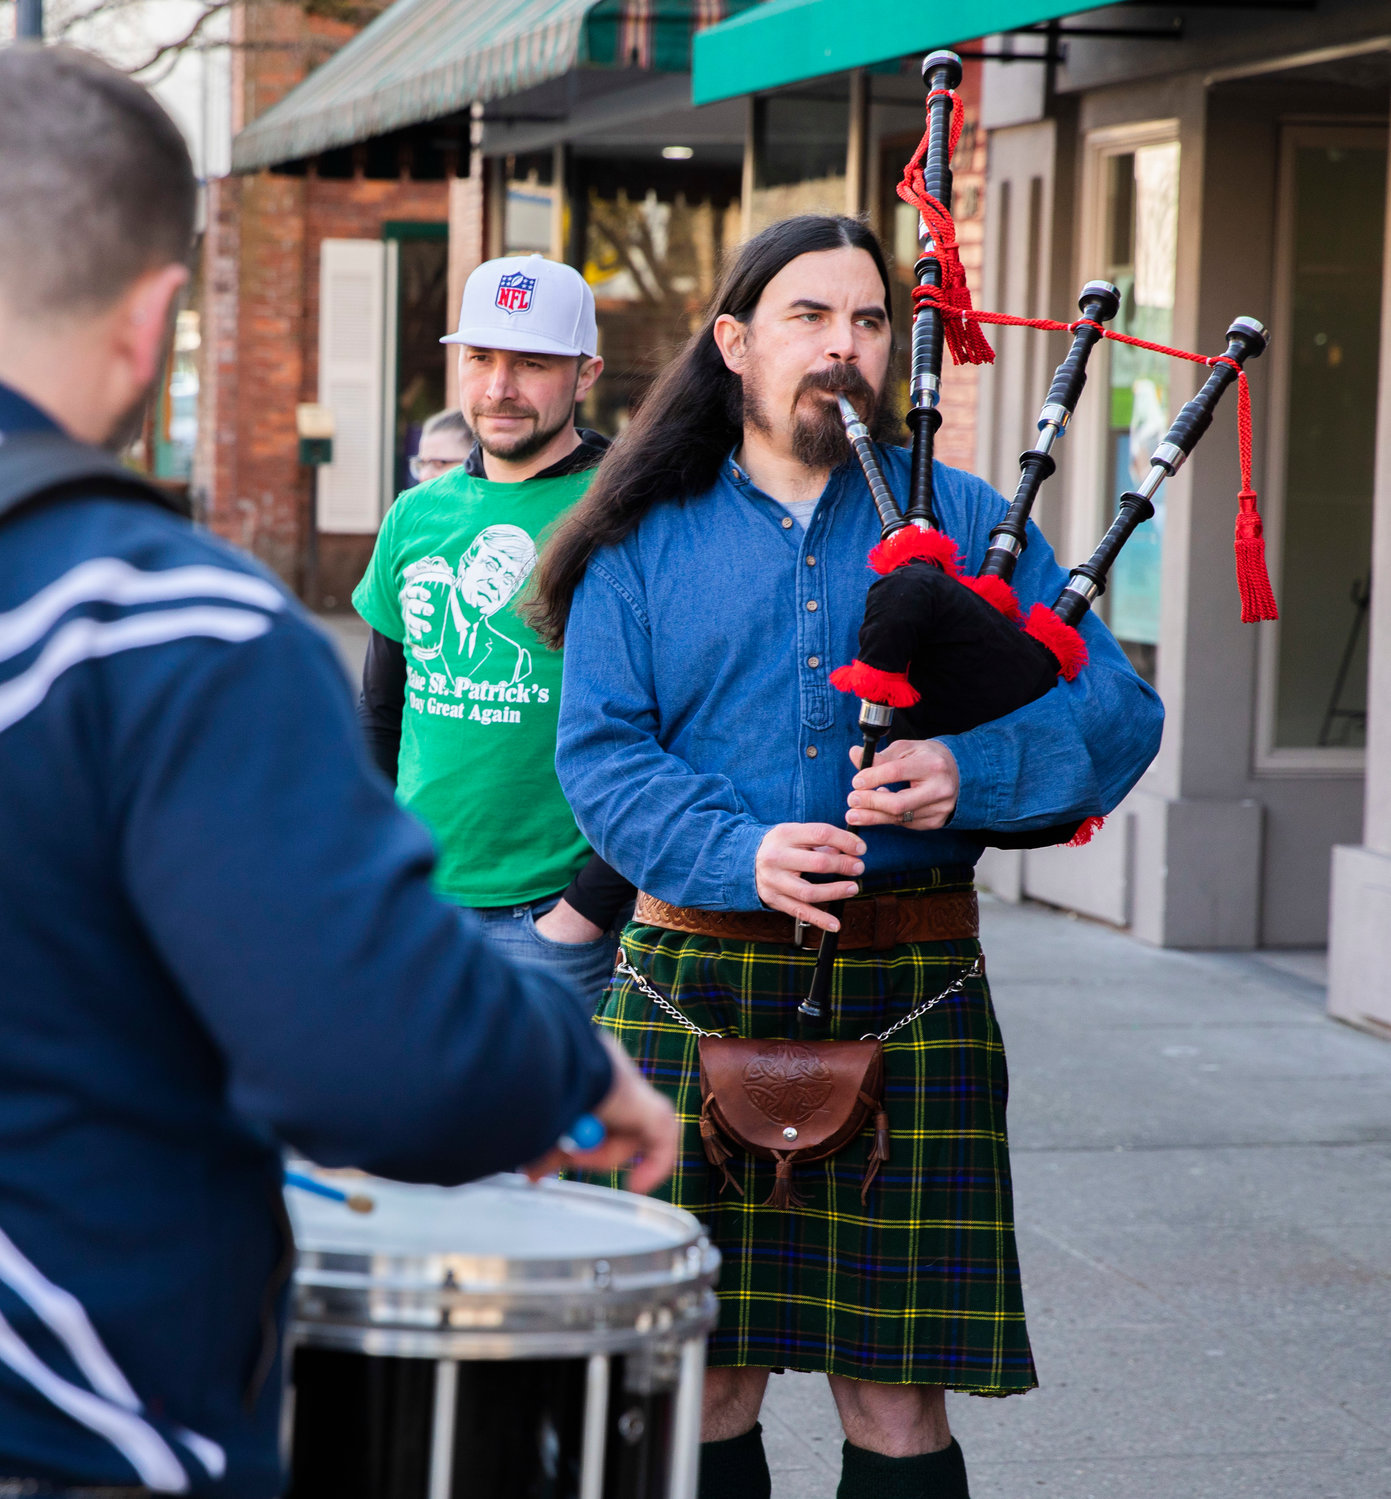 Visitors walk outside O’Blarney’s Irish Pub on Thursday to listen to music as James Roush plays bagpipes and Chris McKee plays drums in downtown Centralia.